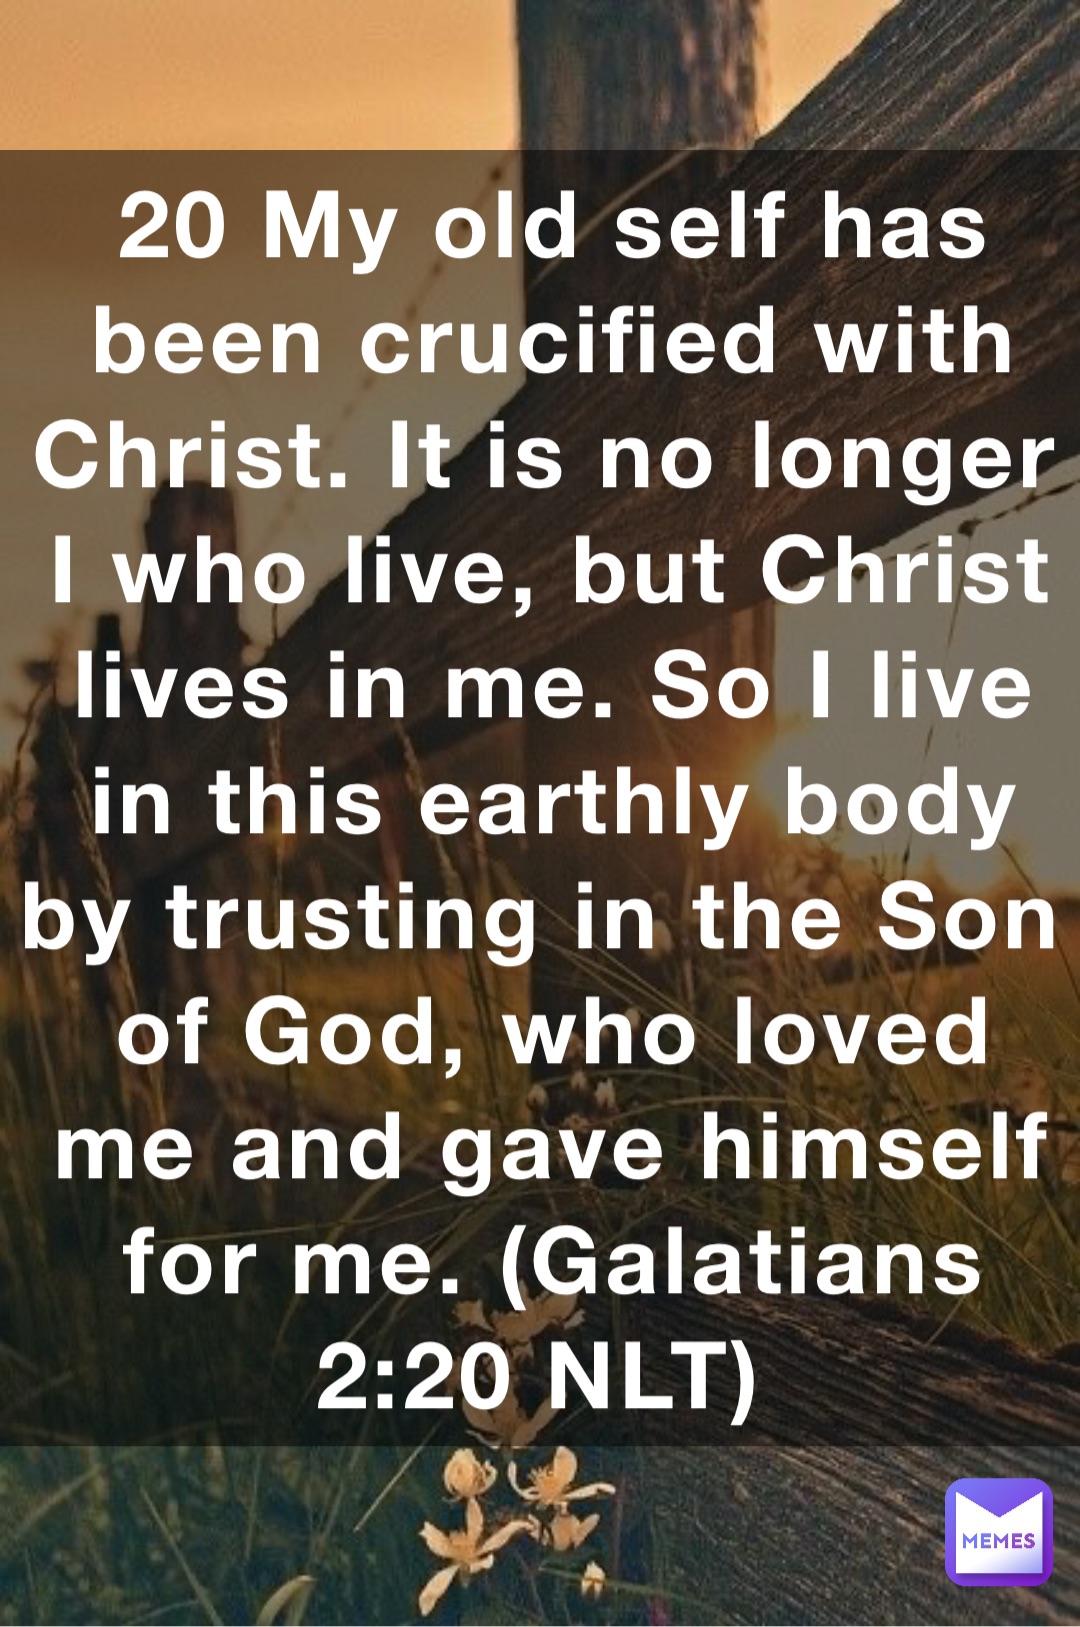 20 My old self has been crucified with Christ. It is no longer I who live, but Christ lives in me. So I live in this earthly body by trusting in the Son of God, who loved me and gave himself for me. (‭‭‭Galatians‬ ‭2‬‬:‭20‬ ‭NLT‬‬)